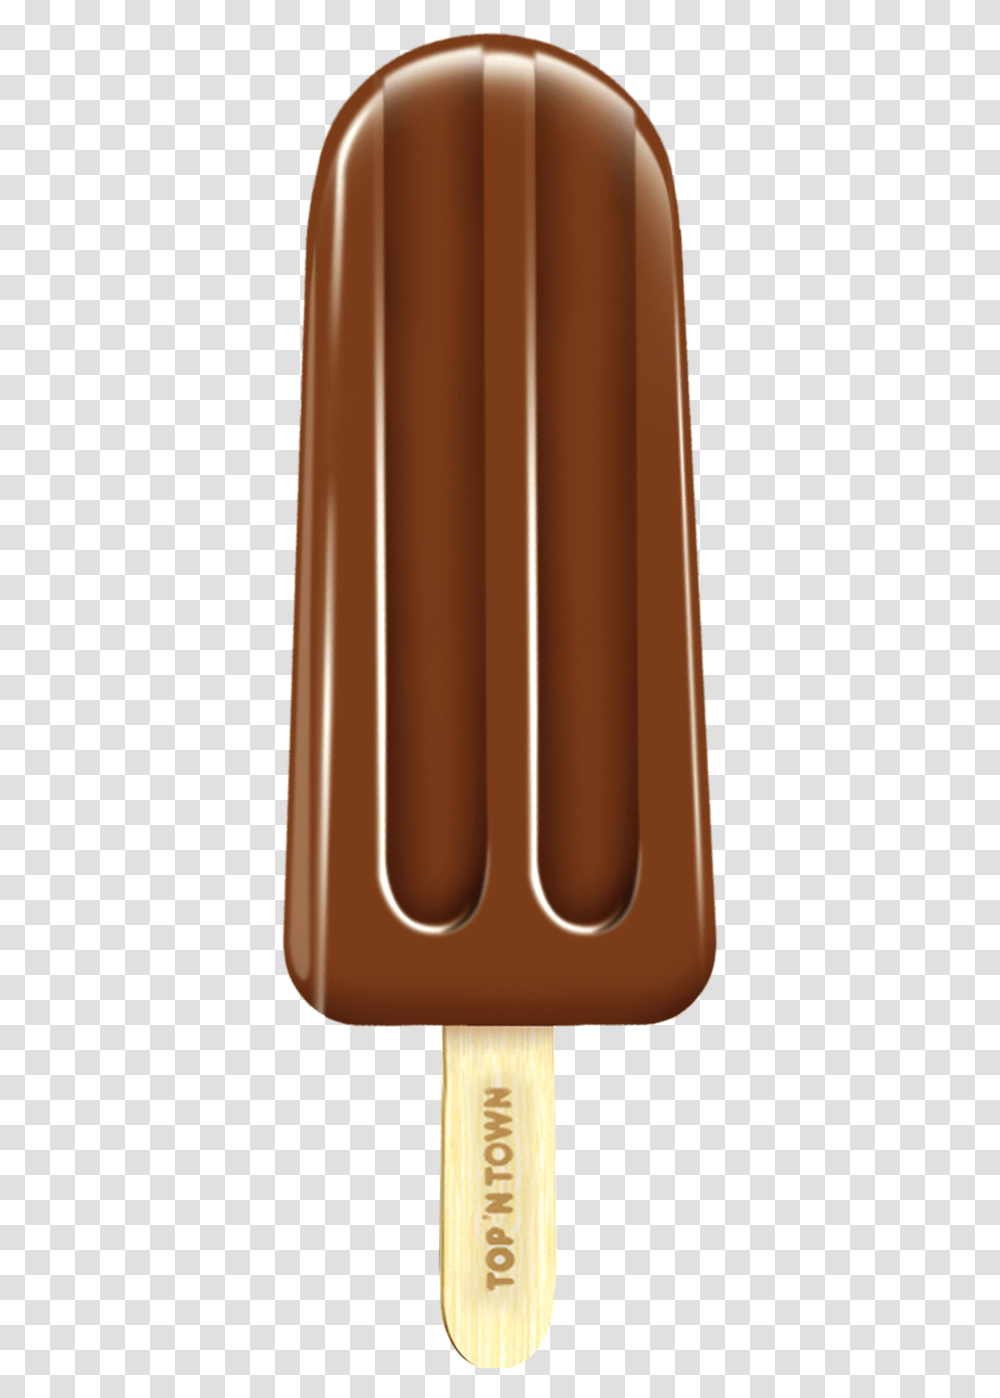 Chocobar Ice Cream Download Mobile Phone, Sweets, Food, Dessert Transparent Png